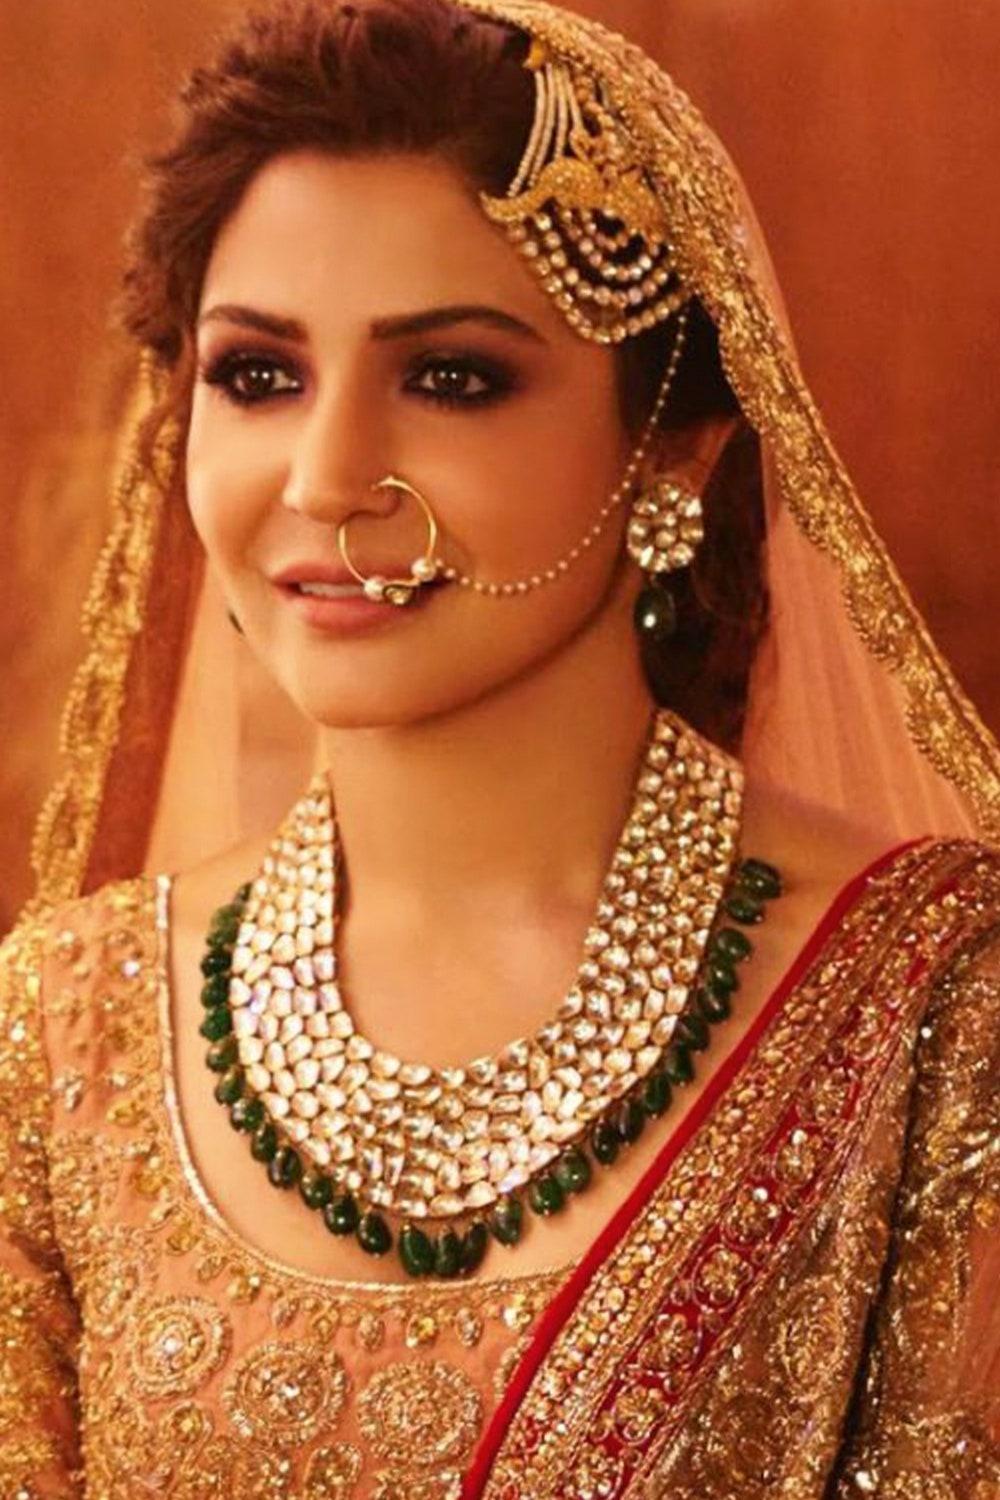 Brides, here's how you can wear a passa for your wedding | Vogue India